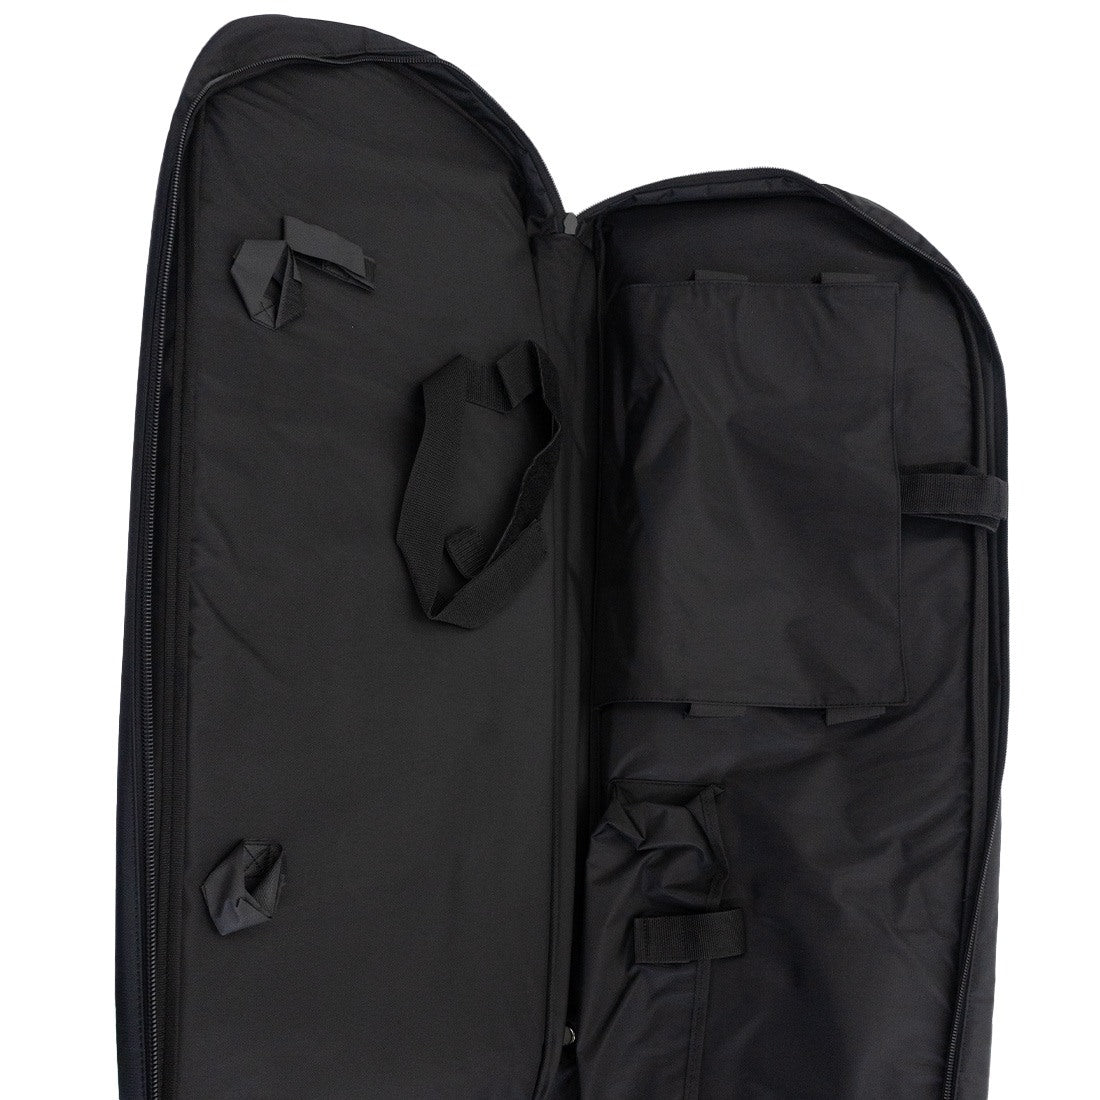 Unger nLITE Carrying Bag Inside View